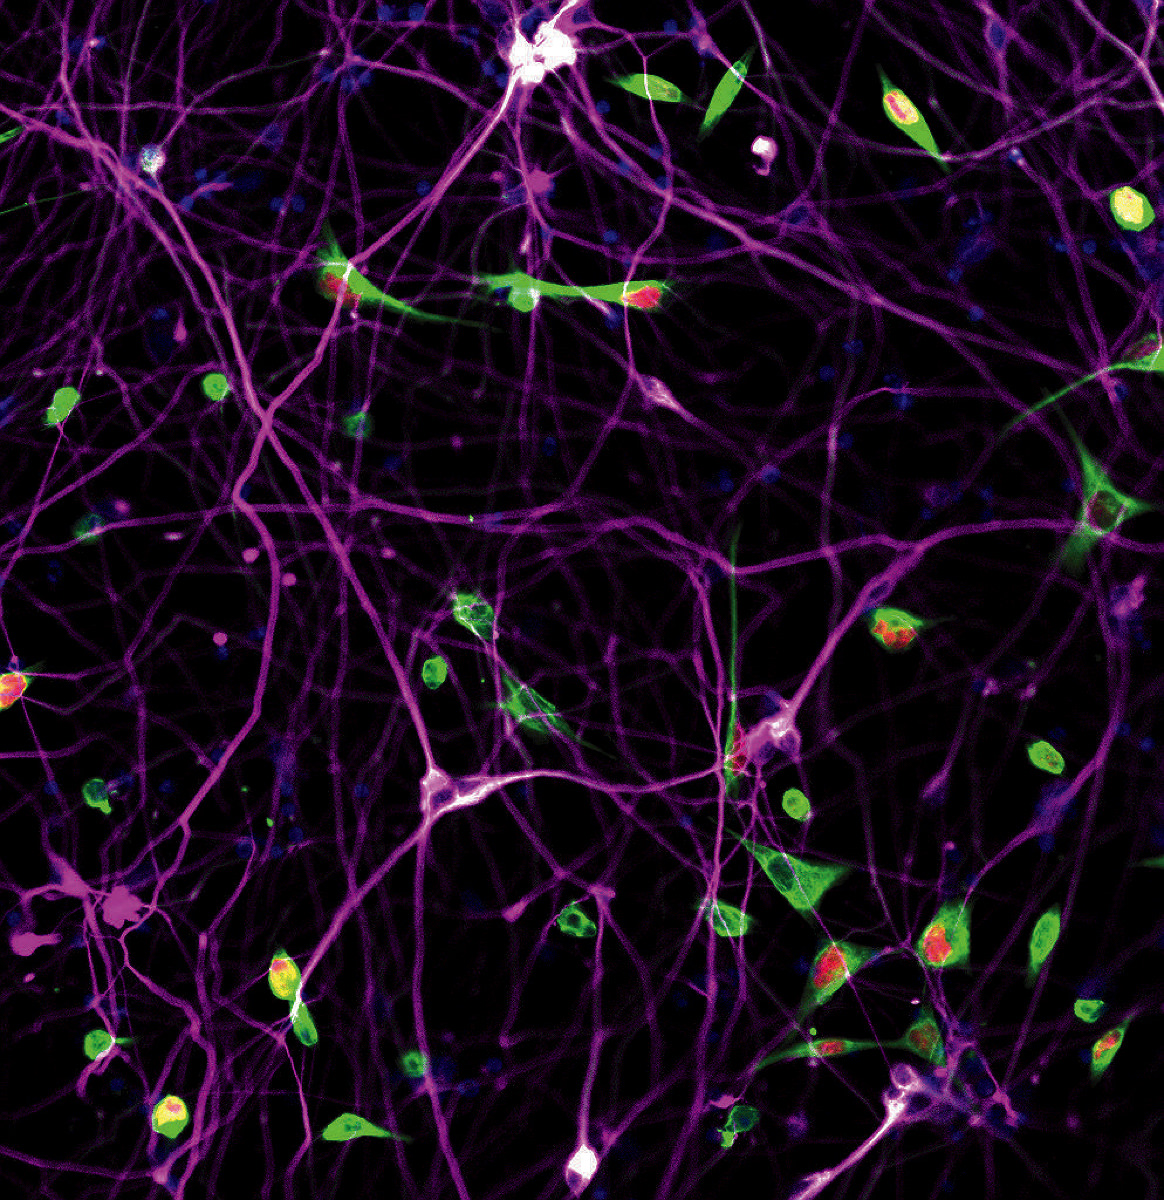 High resolution photograph of green cancer cells interacting with elongated purple neurons